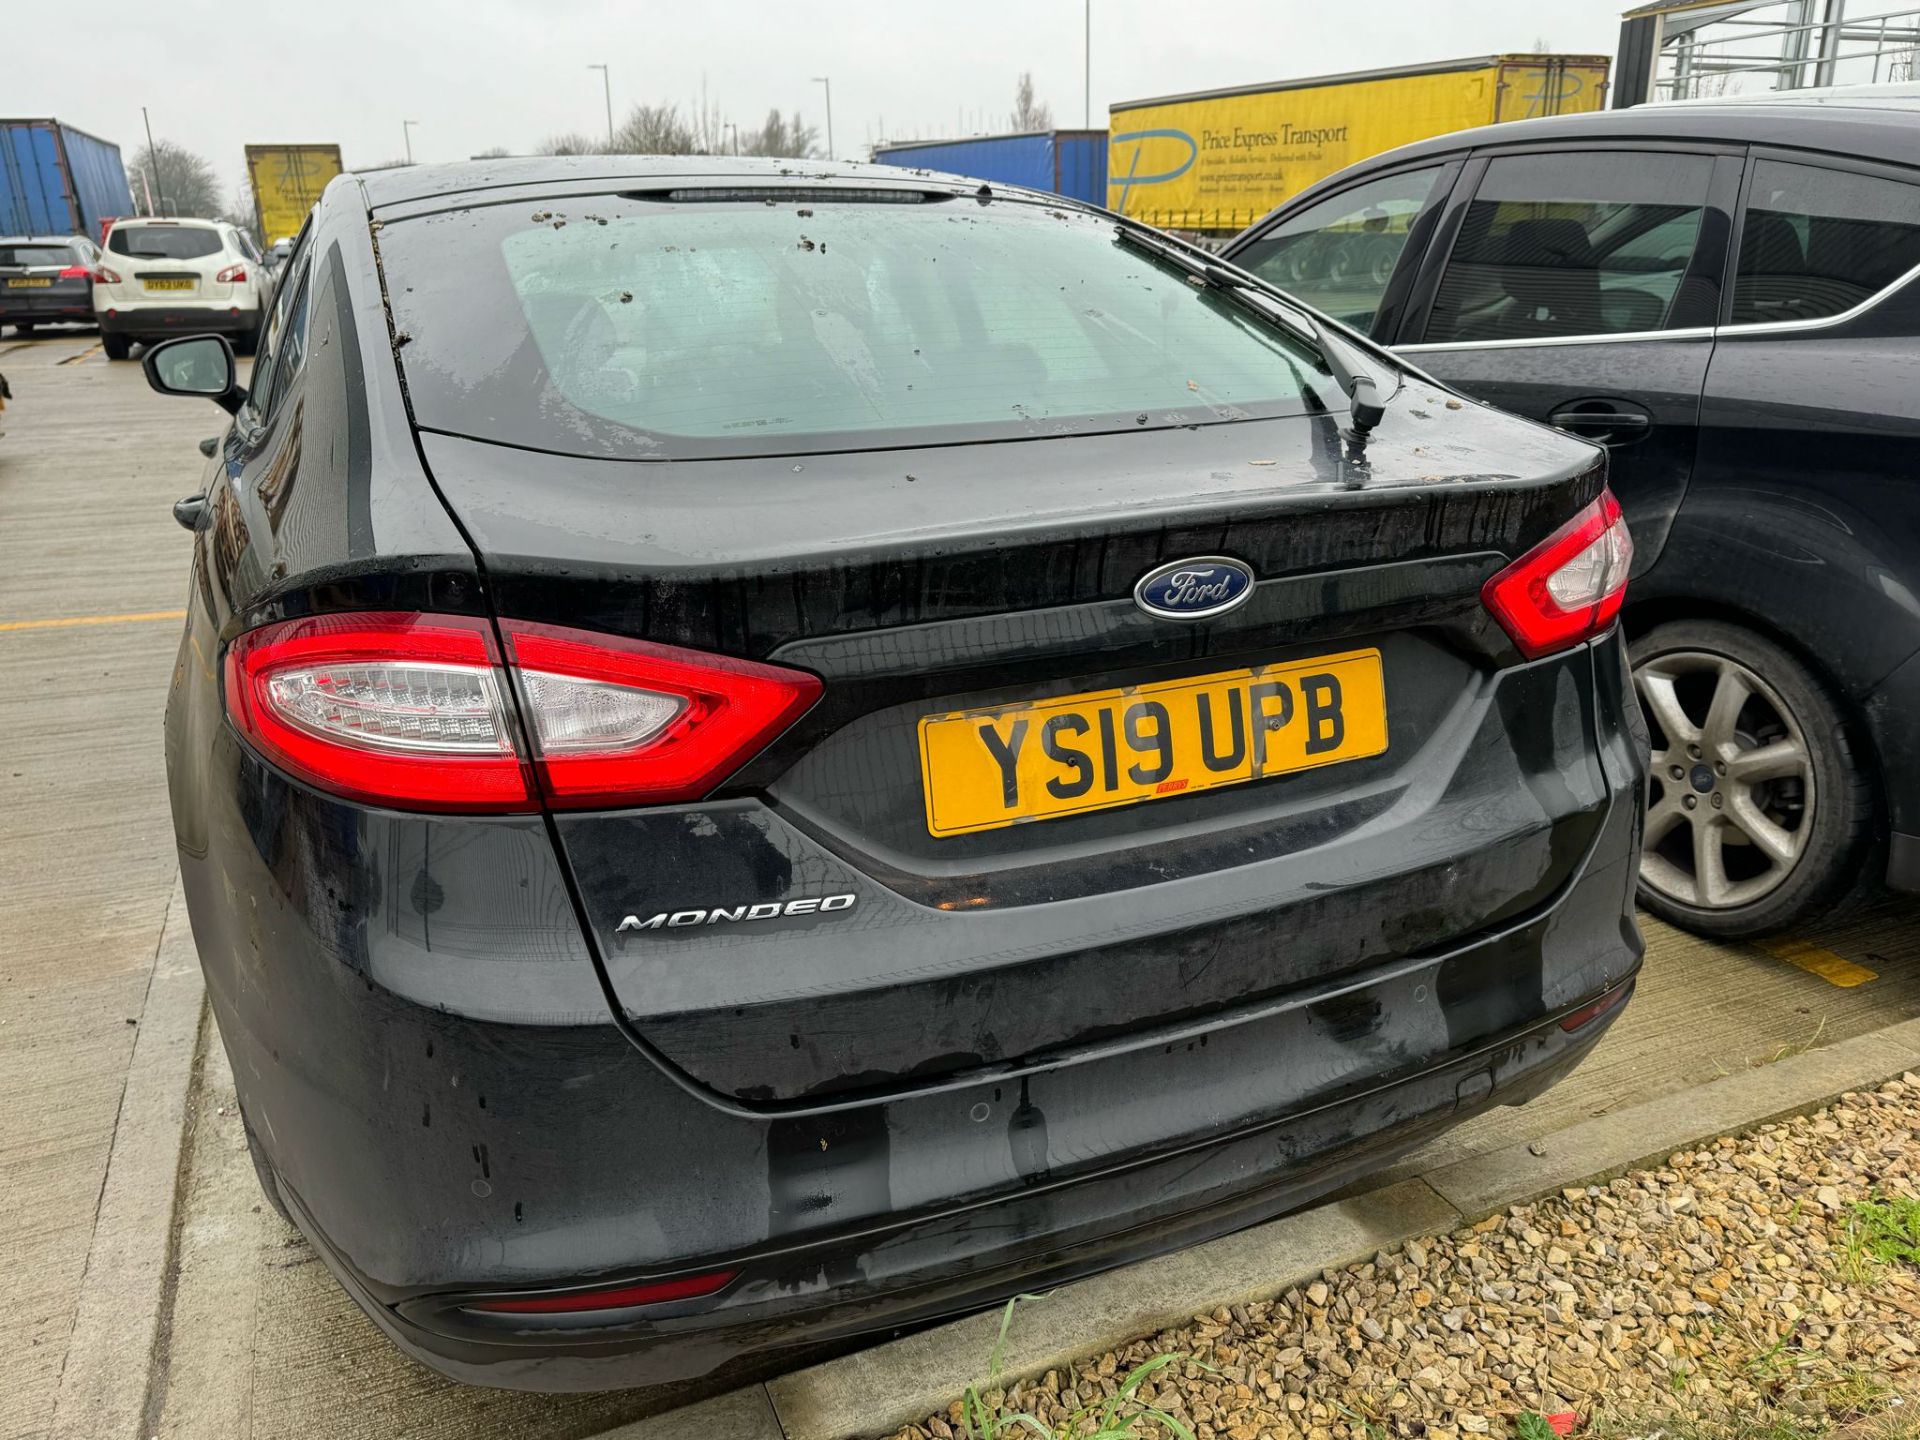 NO RESERVE - 2019, FORD Mondeo (Ex-Fleet Vehicle) - Image 4 of 19